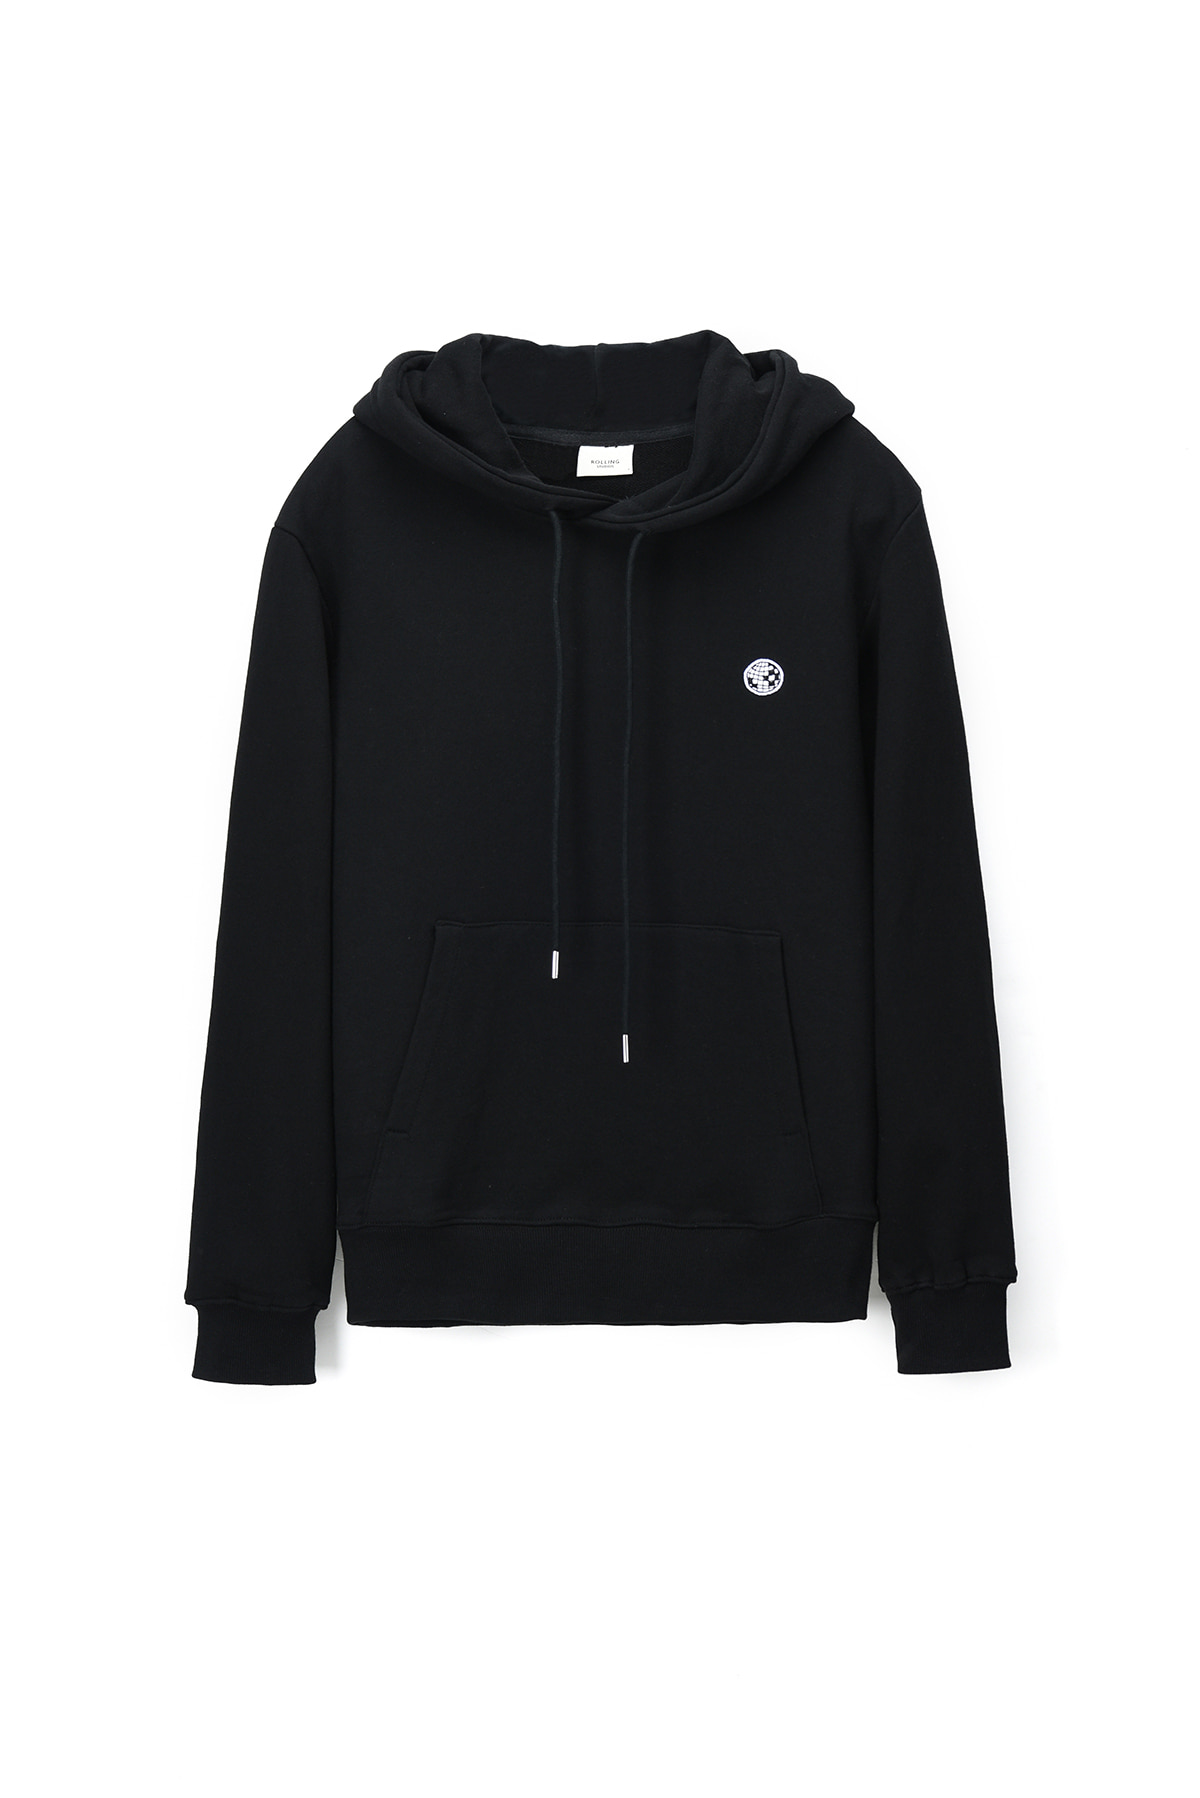 MIRRORBALL EMBROIDERED ROLLING FLOCKED CLASSIC HOODIE BLACK